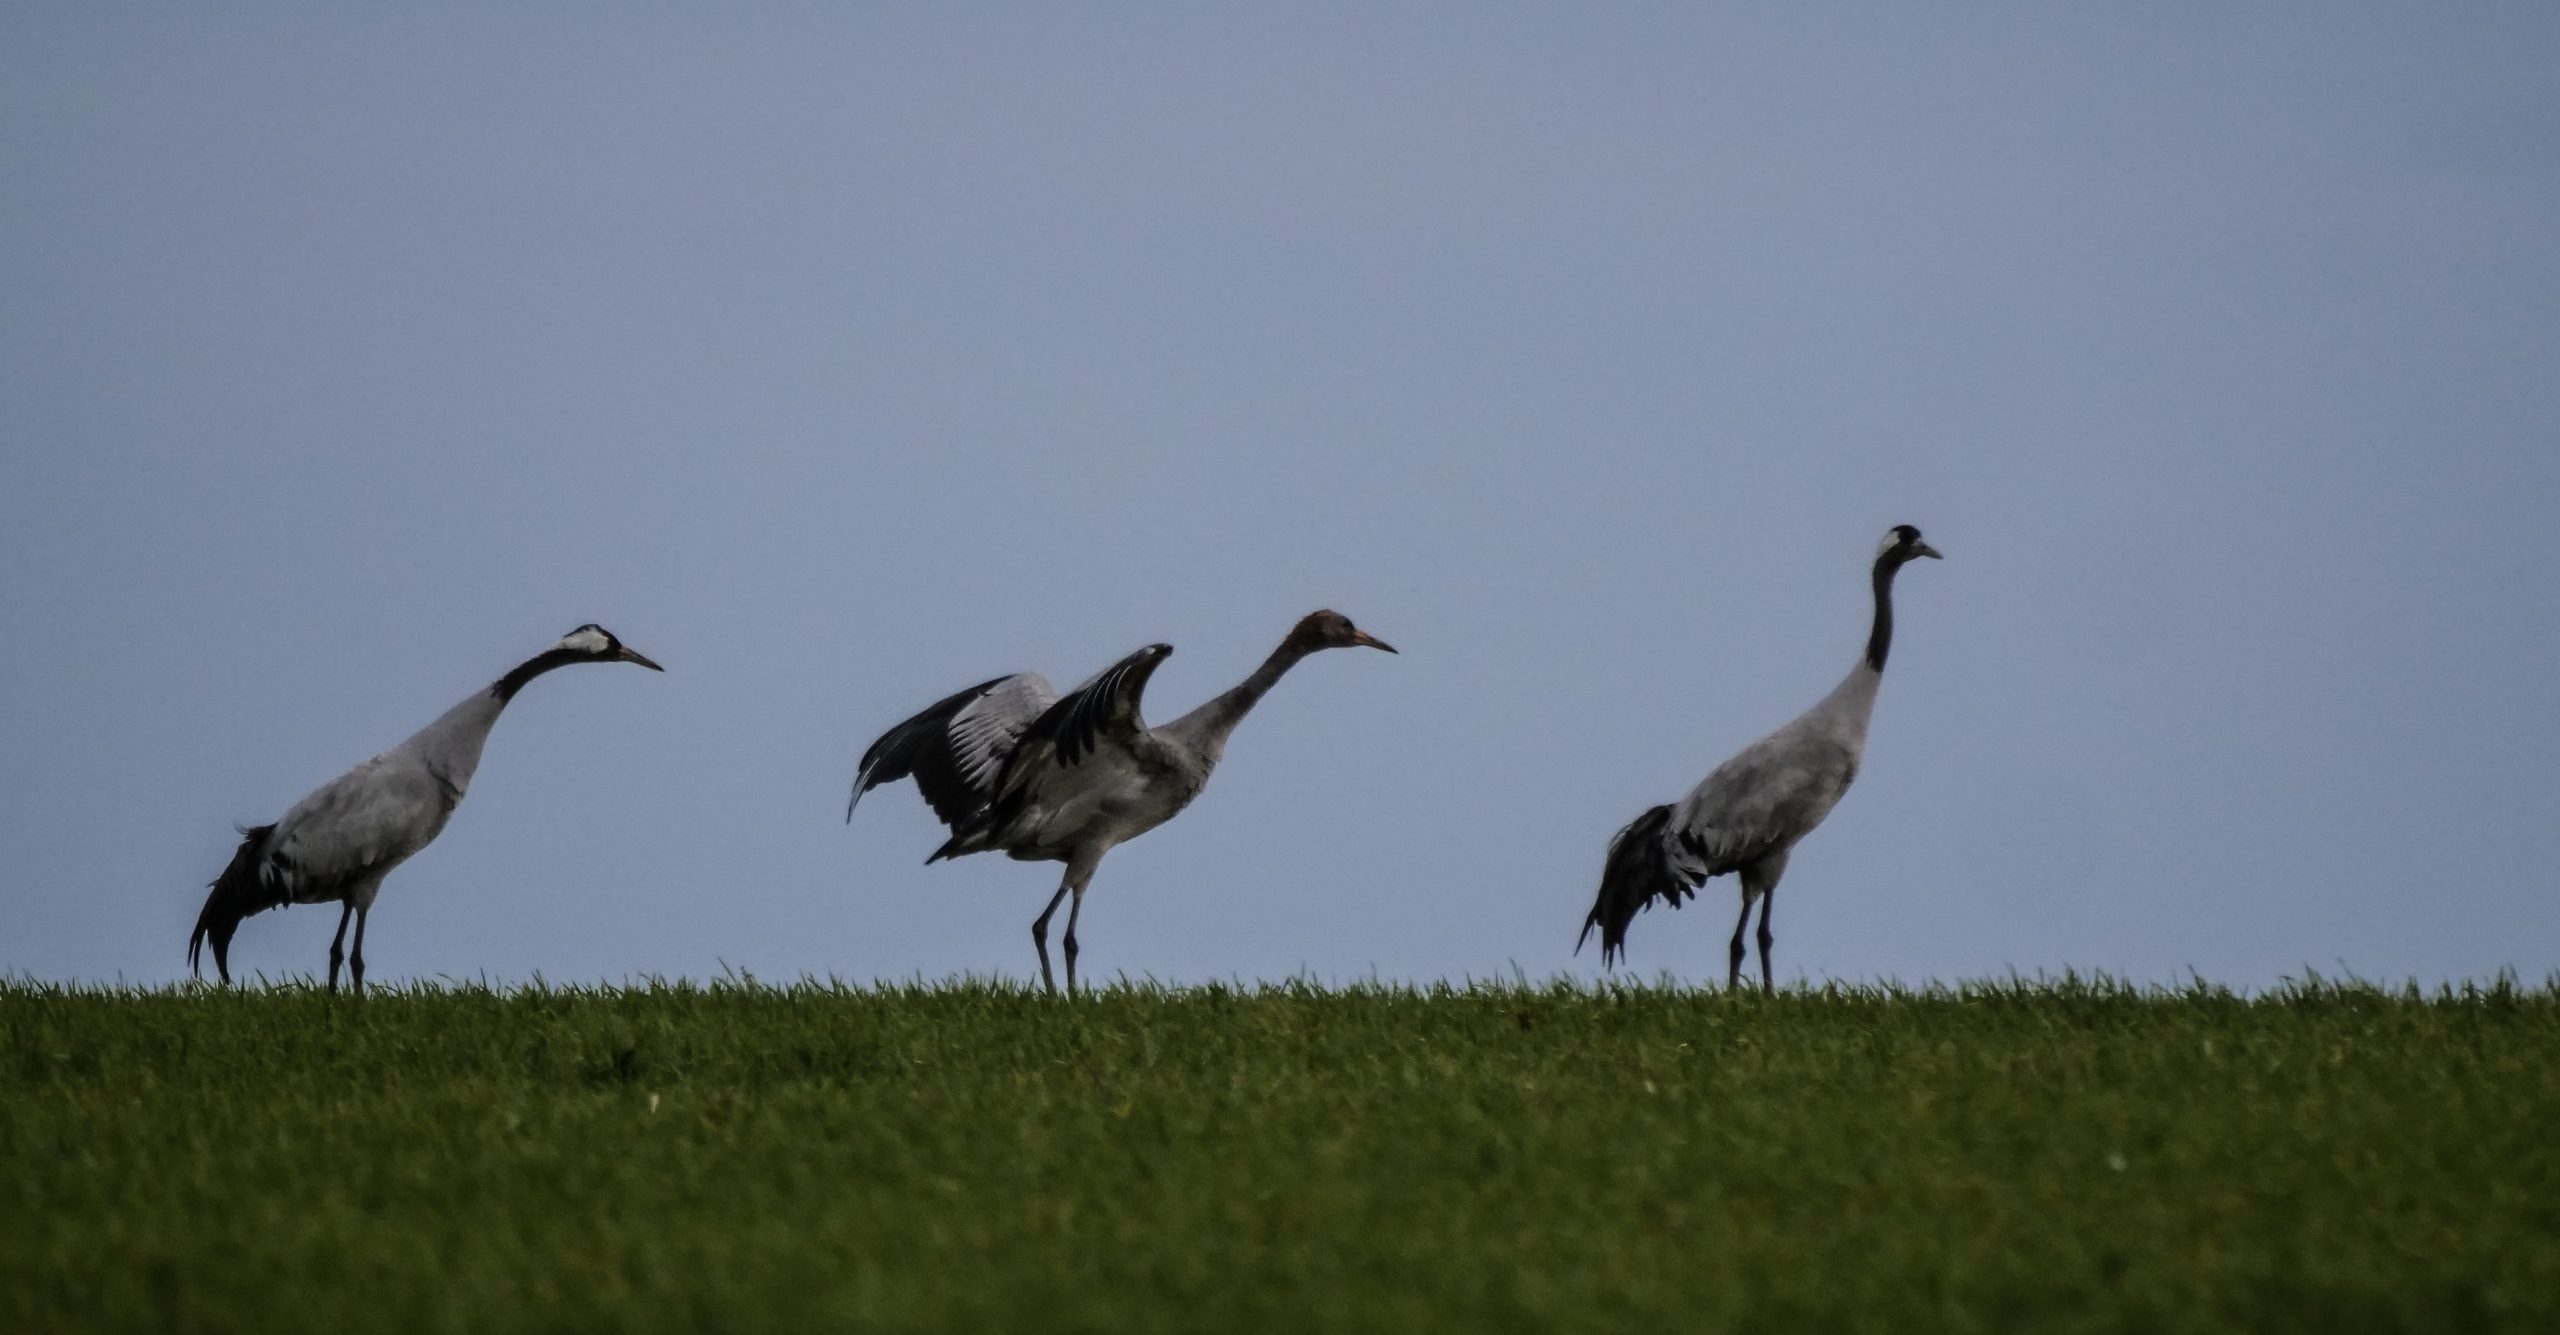 Cranes on the Field V